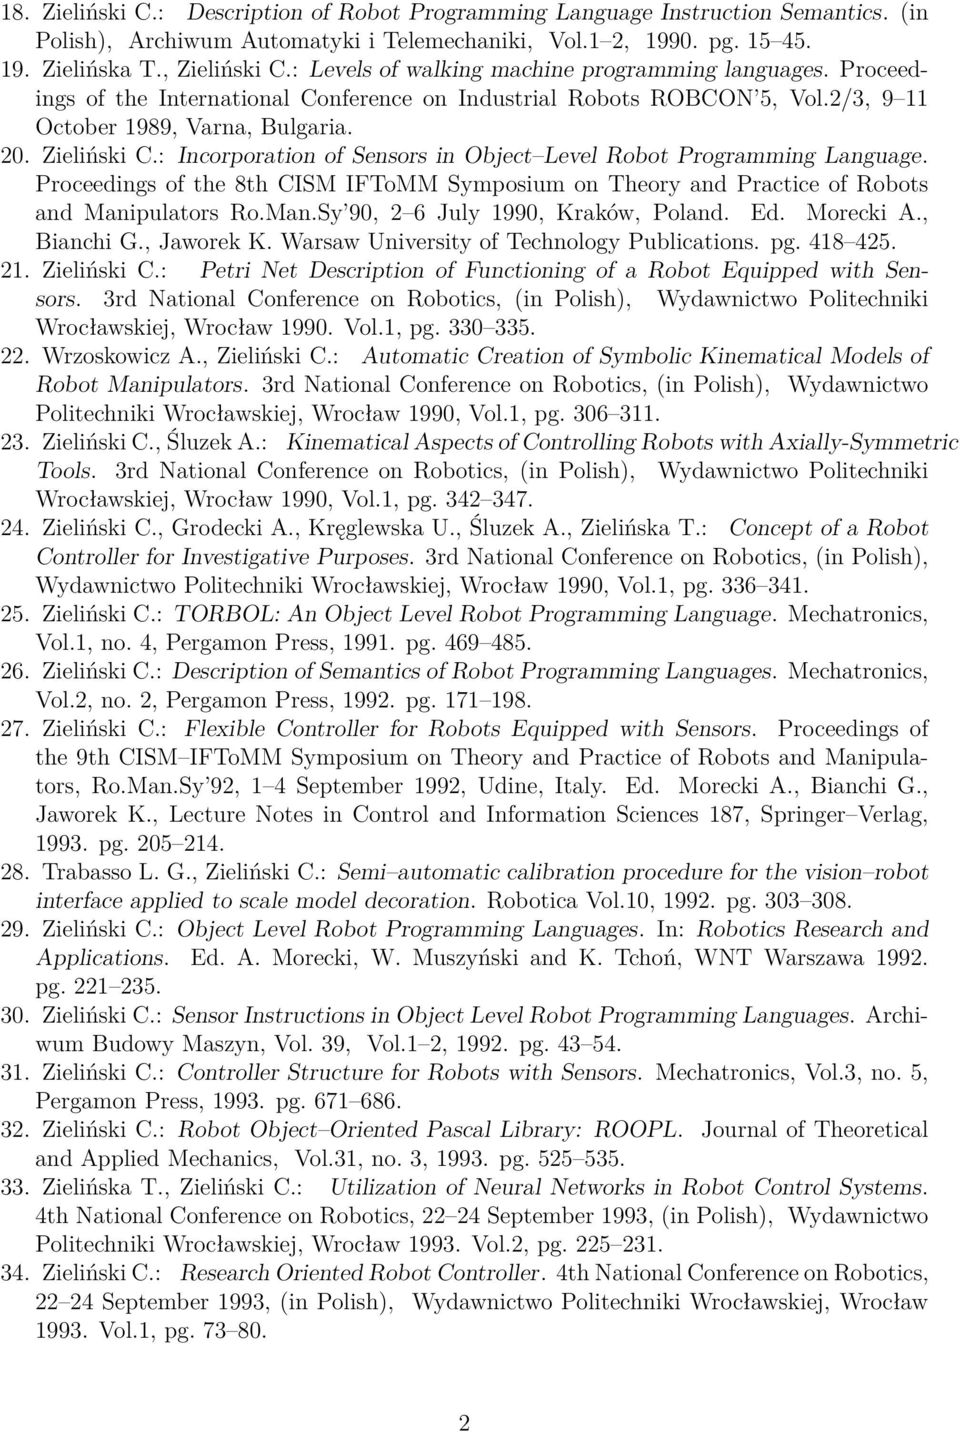 : Incorporation of Sensors in Object Level Robot Programming Language. Proceedings of the 8th CISM IFToMM Symposium on Theory and Practice of Robots and Manipulators Ro.Man.Sy 90, 2 6 July 1990, Kraków, Poland.